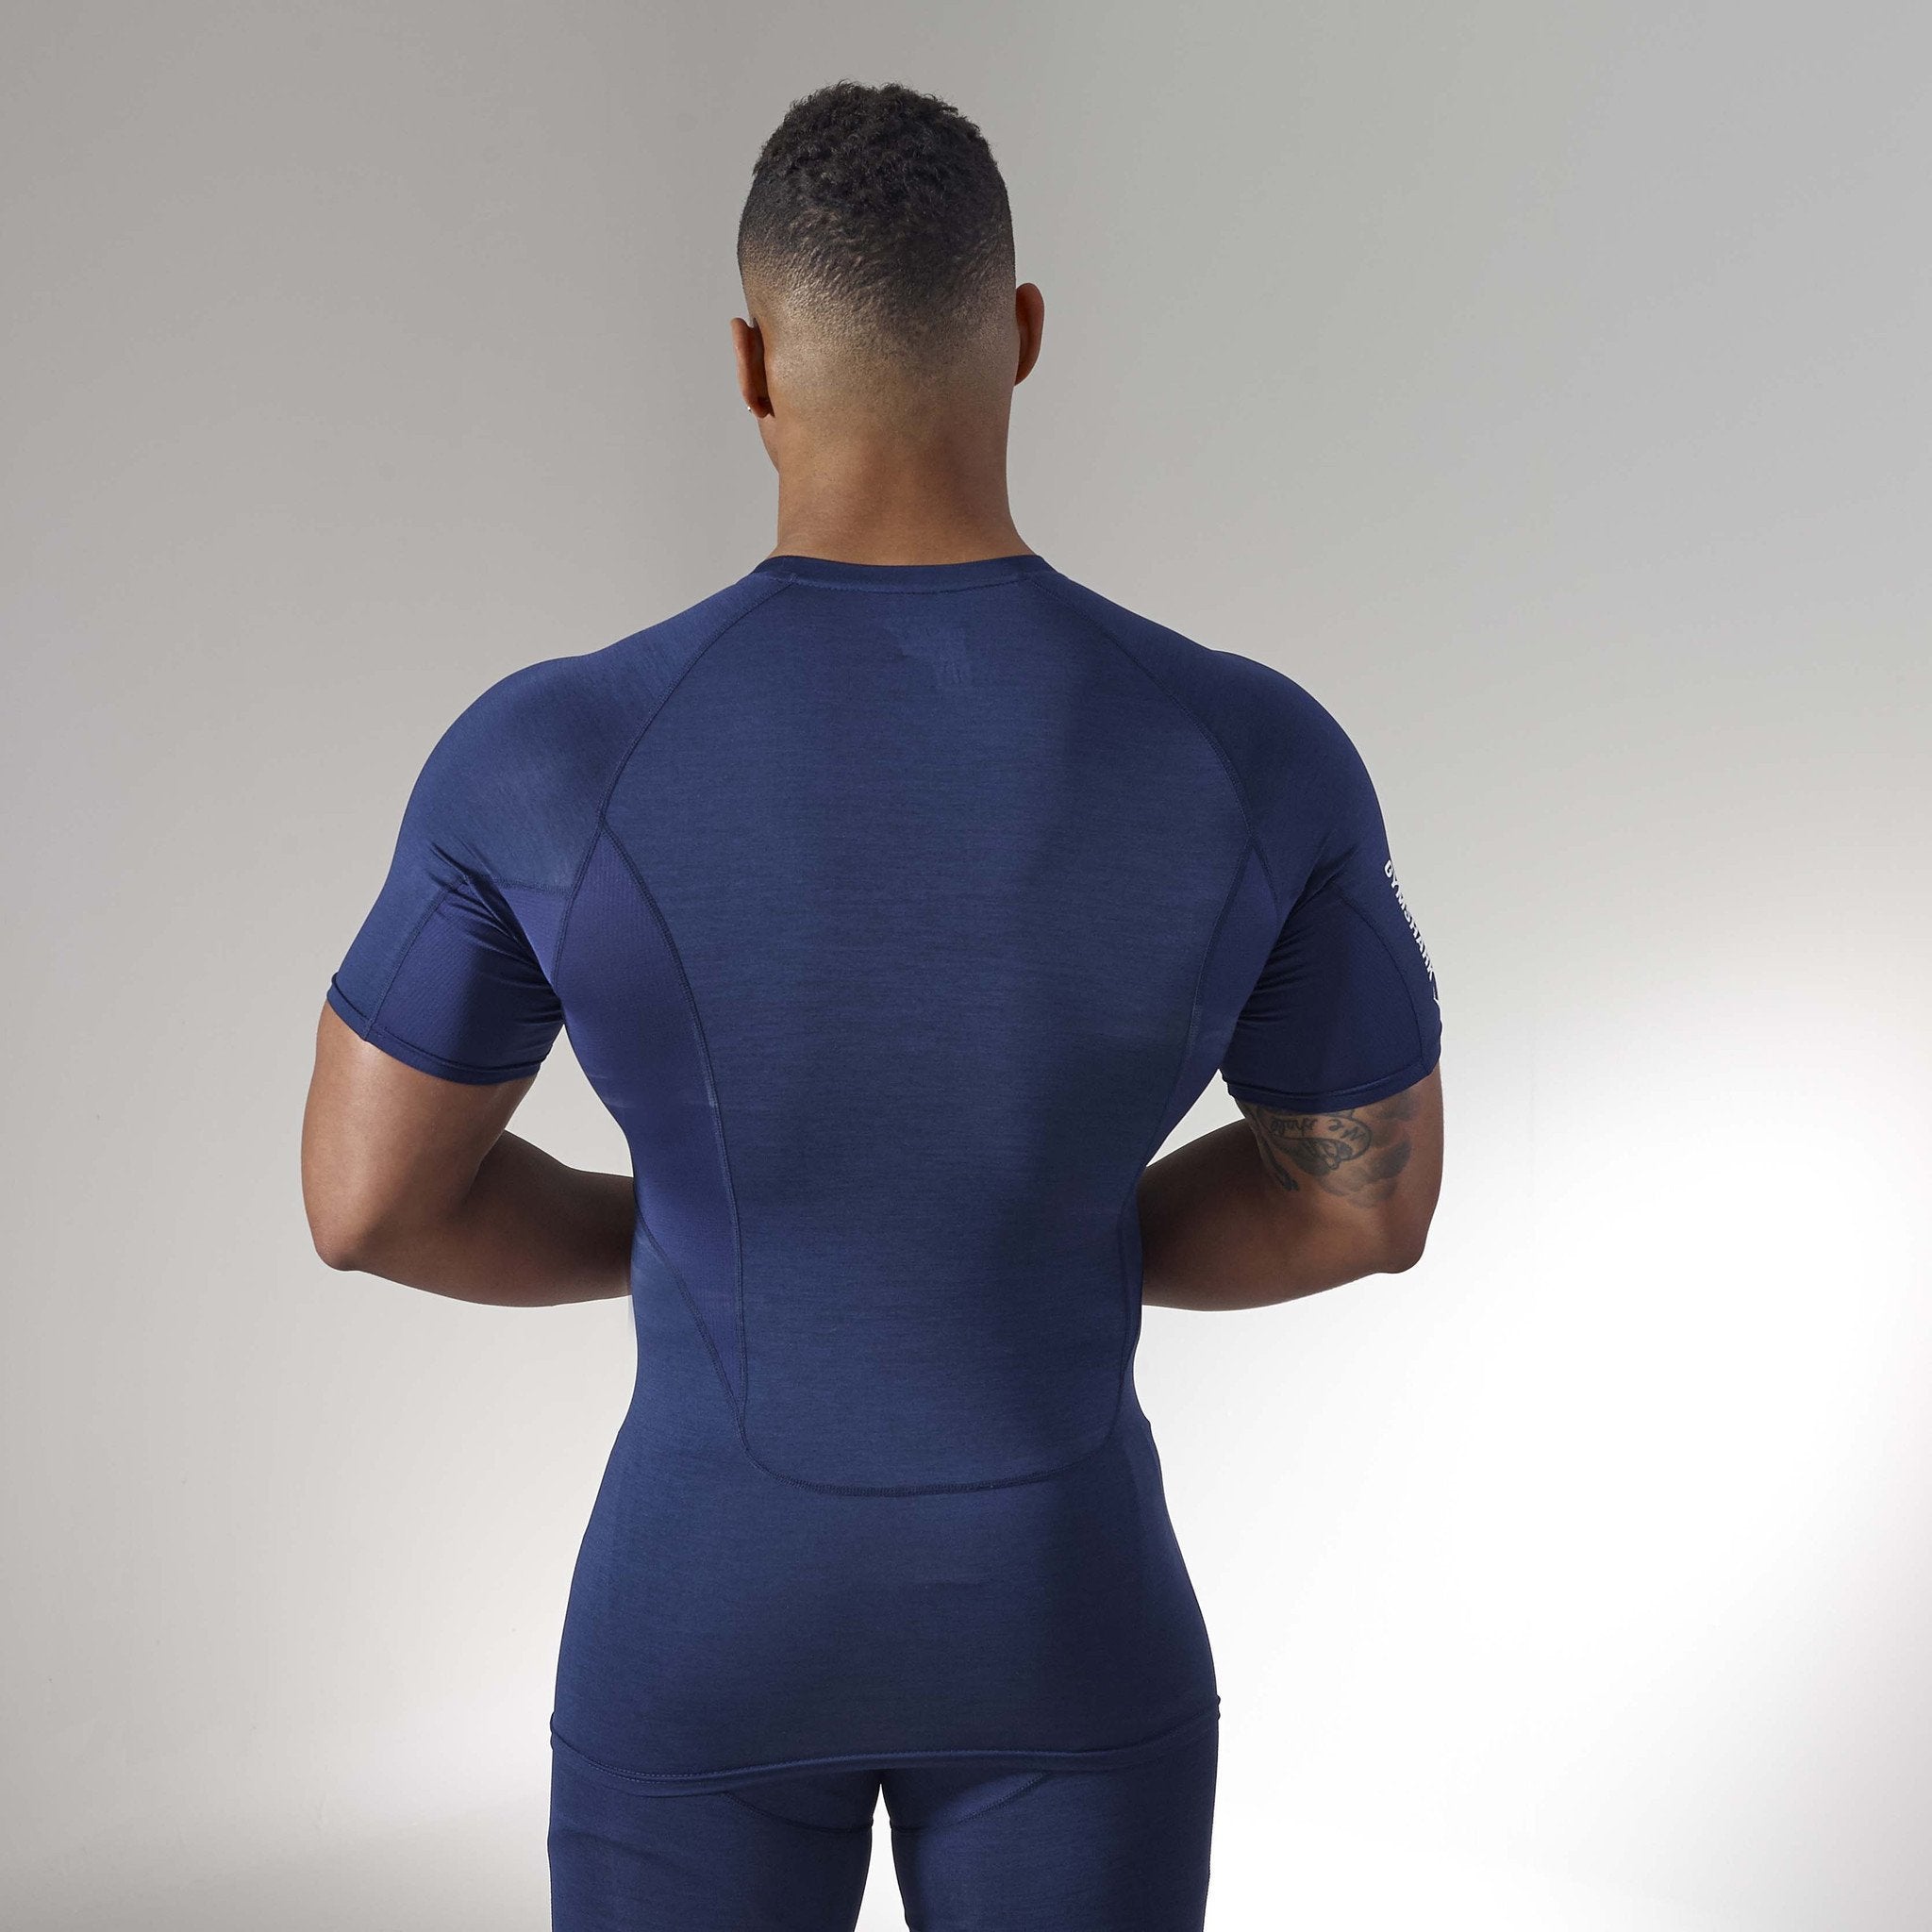 Element Baselayer Short Sleeve Top in Sapphire Blue Marl - view 4